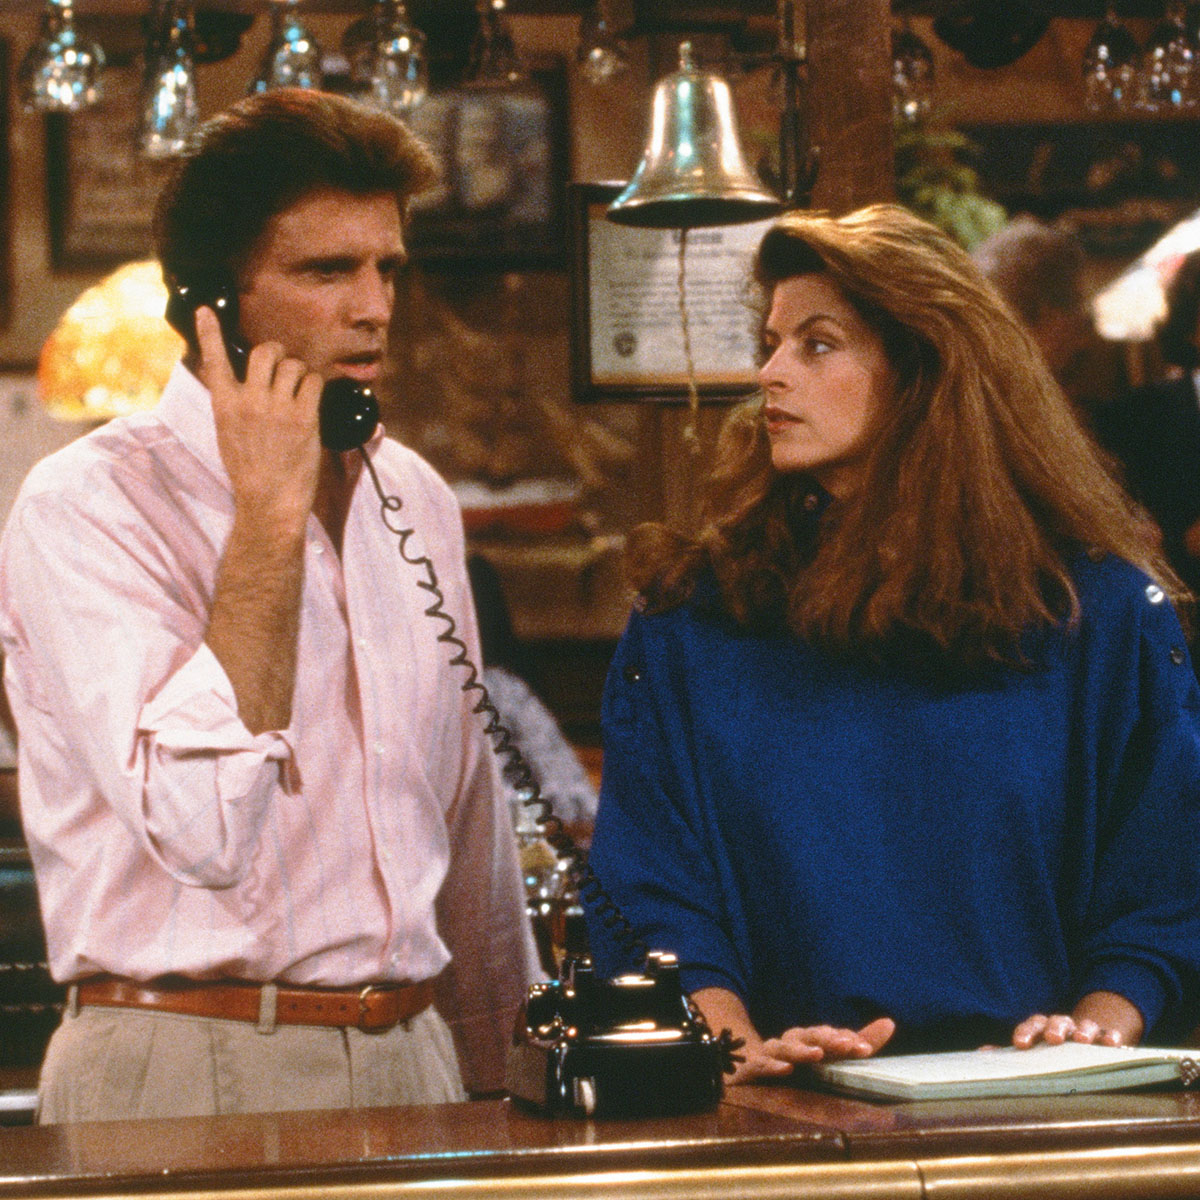 Ted Danson Honors “Brilliant” Cheers Co-Star Kirstie Alley After Her Death – E! Online